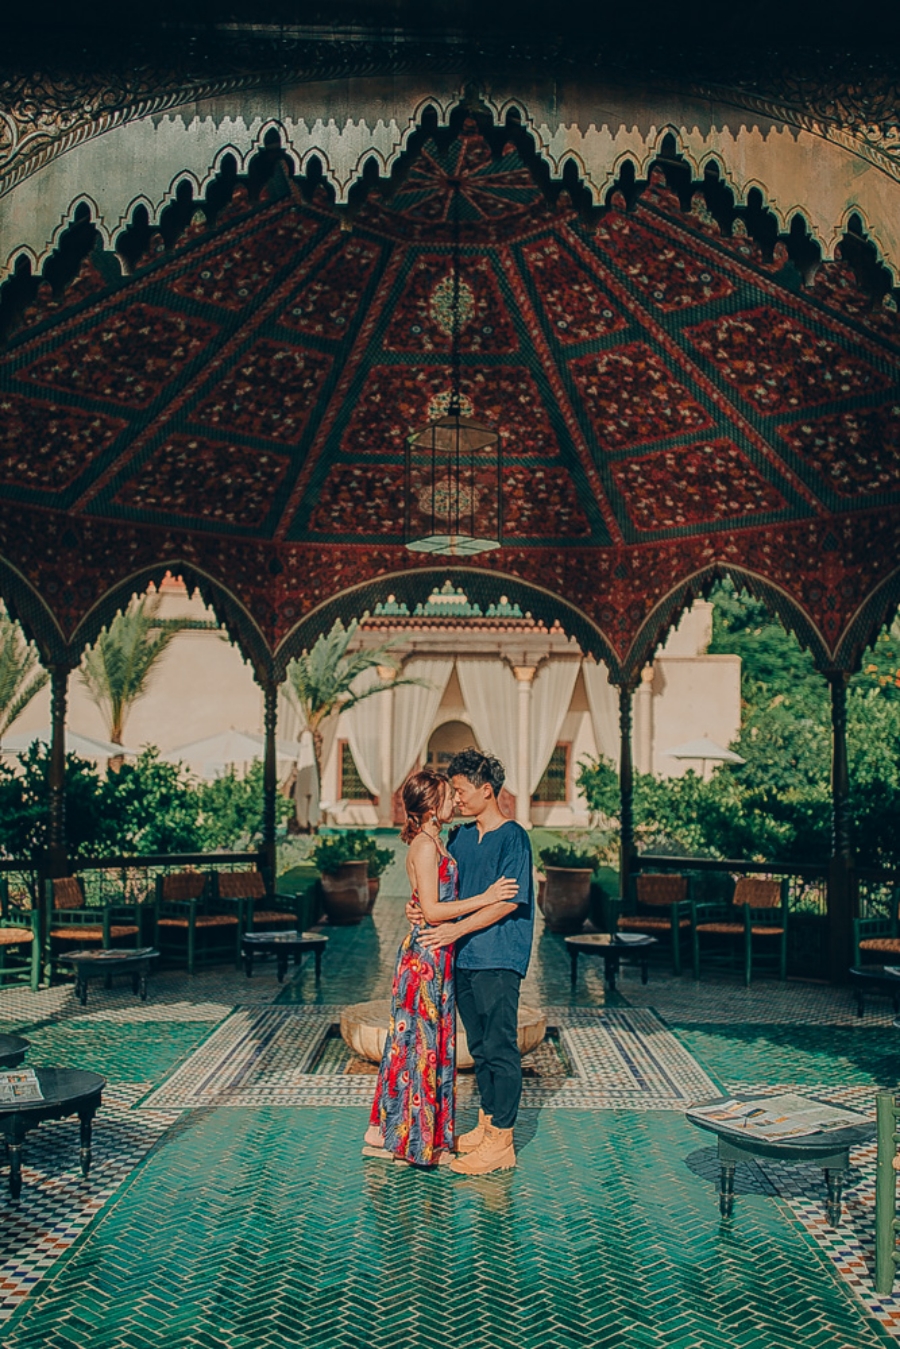 Morocco Pre-Wedding Photoshoot At Marrakech - Le Jardin Secret And Djemma El Fna Tower by Rich on OneThreeOneFour 4